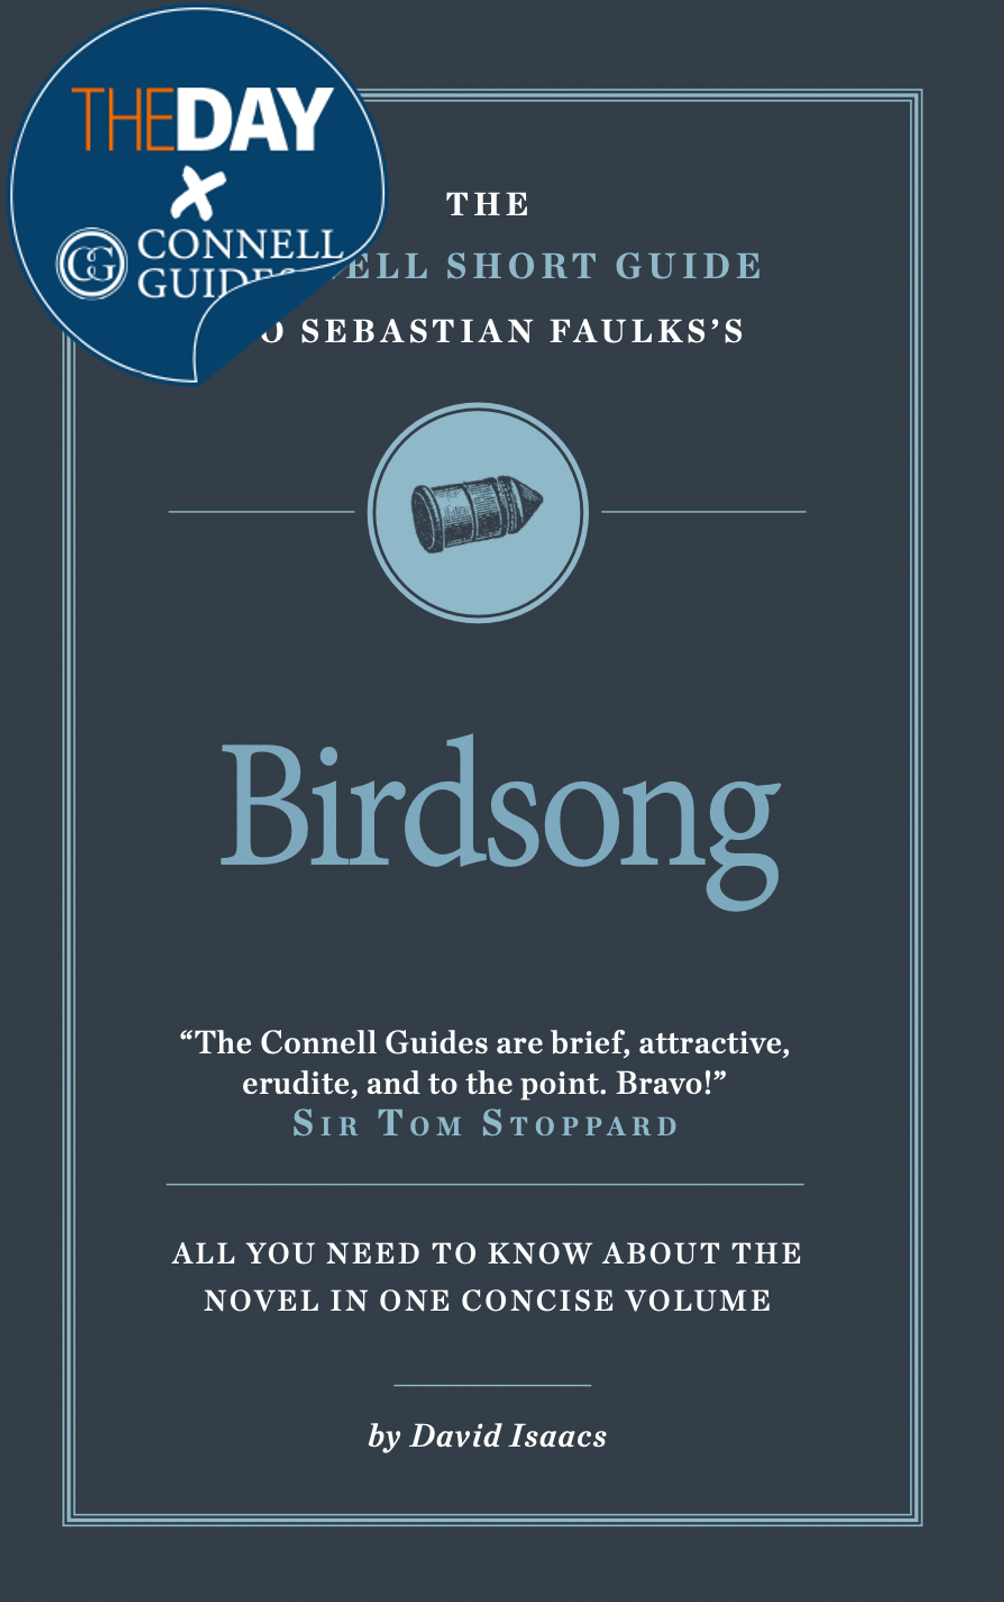 The Day x Connell Guides - The Connell Short Guide to Sebastian Faulks' Birdsong